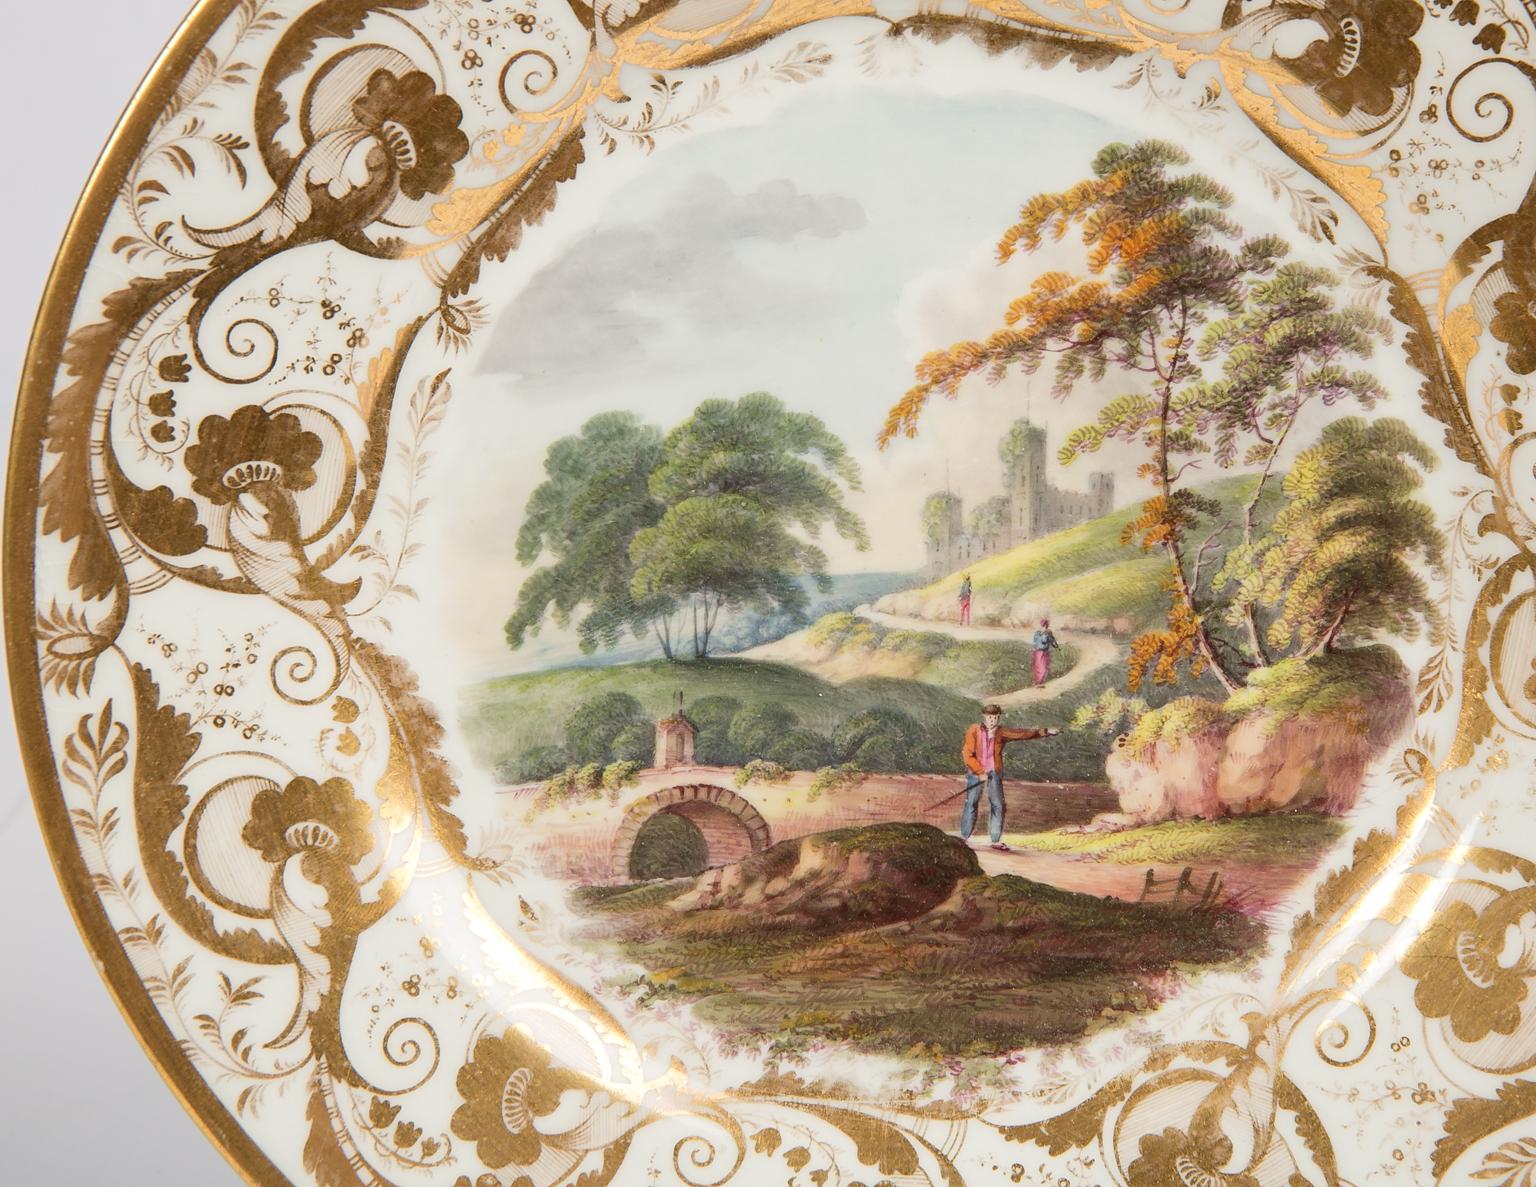 English Antique Porcelain Dishes with Hand-Painted Landscape Scenes